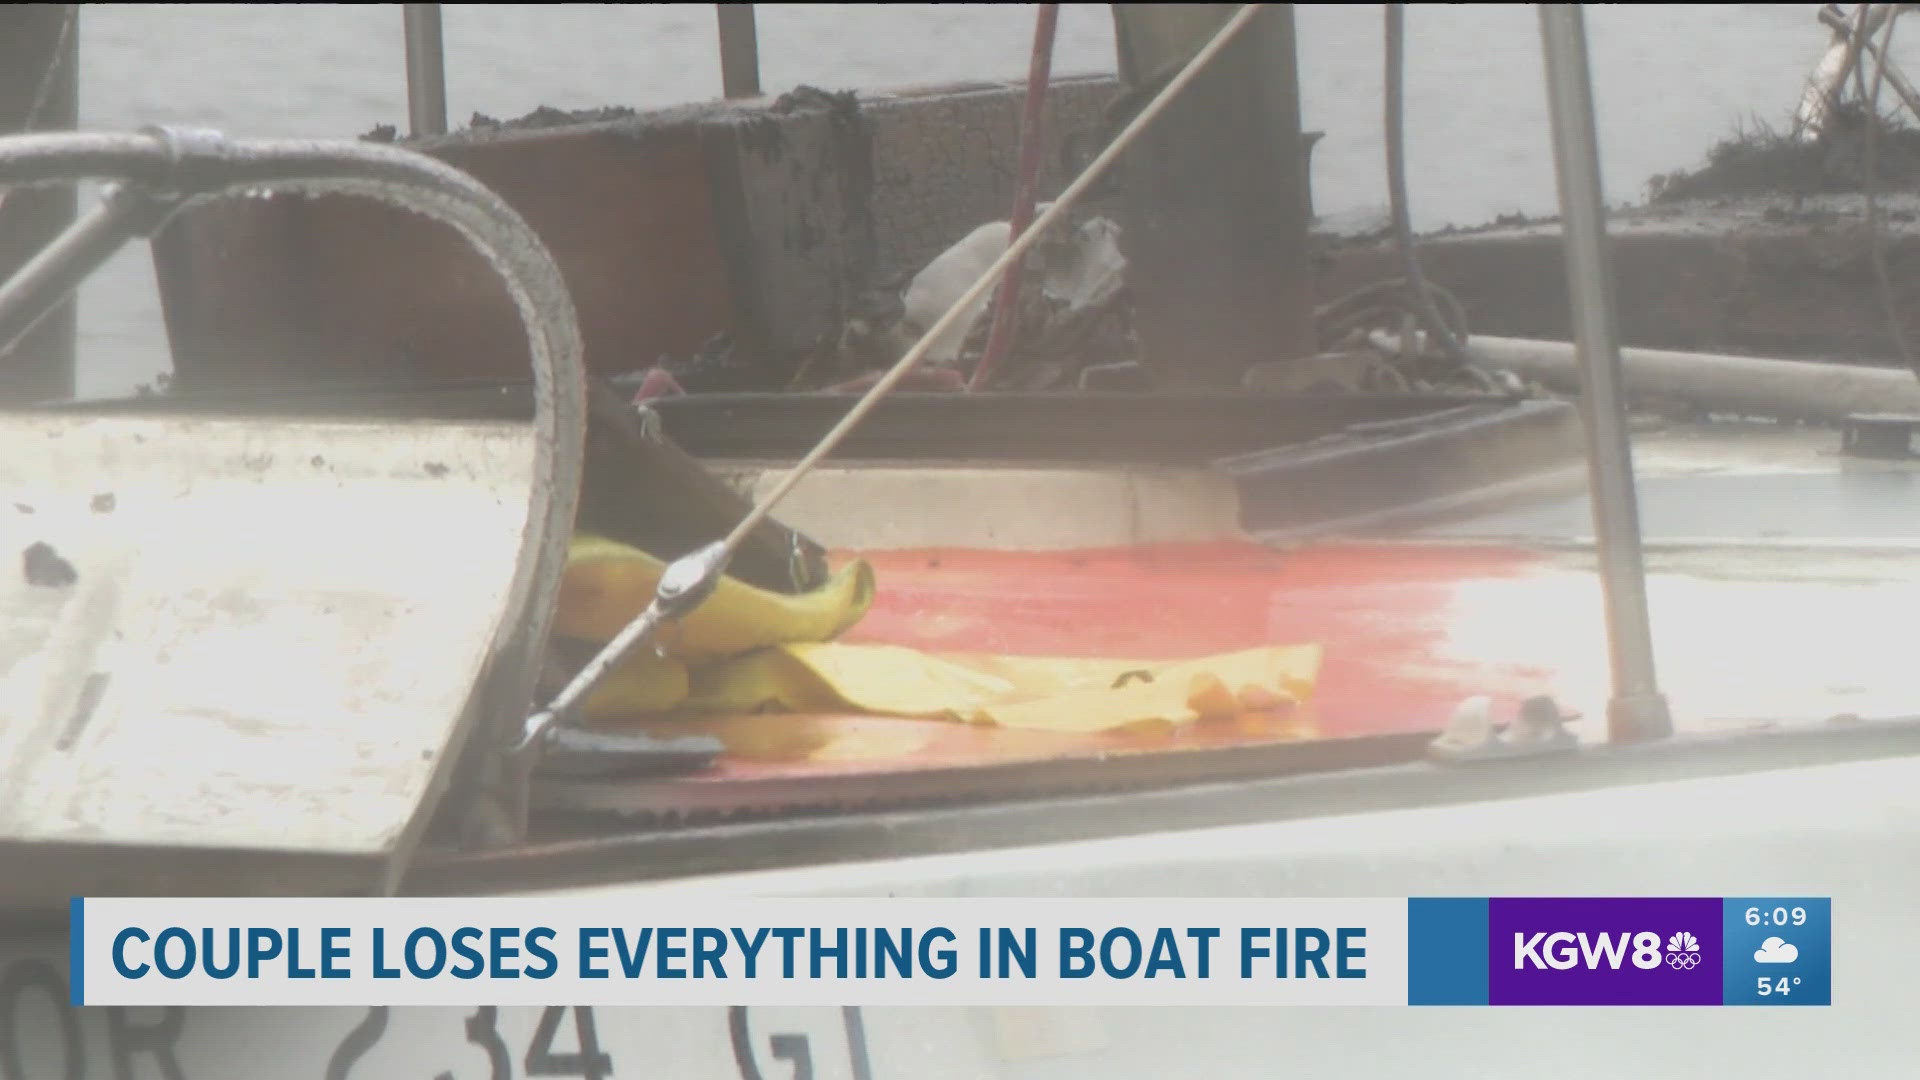 Peter Sostilio and his girlfriend are now starting over again after their boat home caught fire Monday morning.